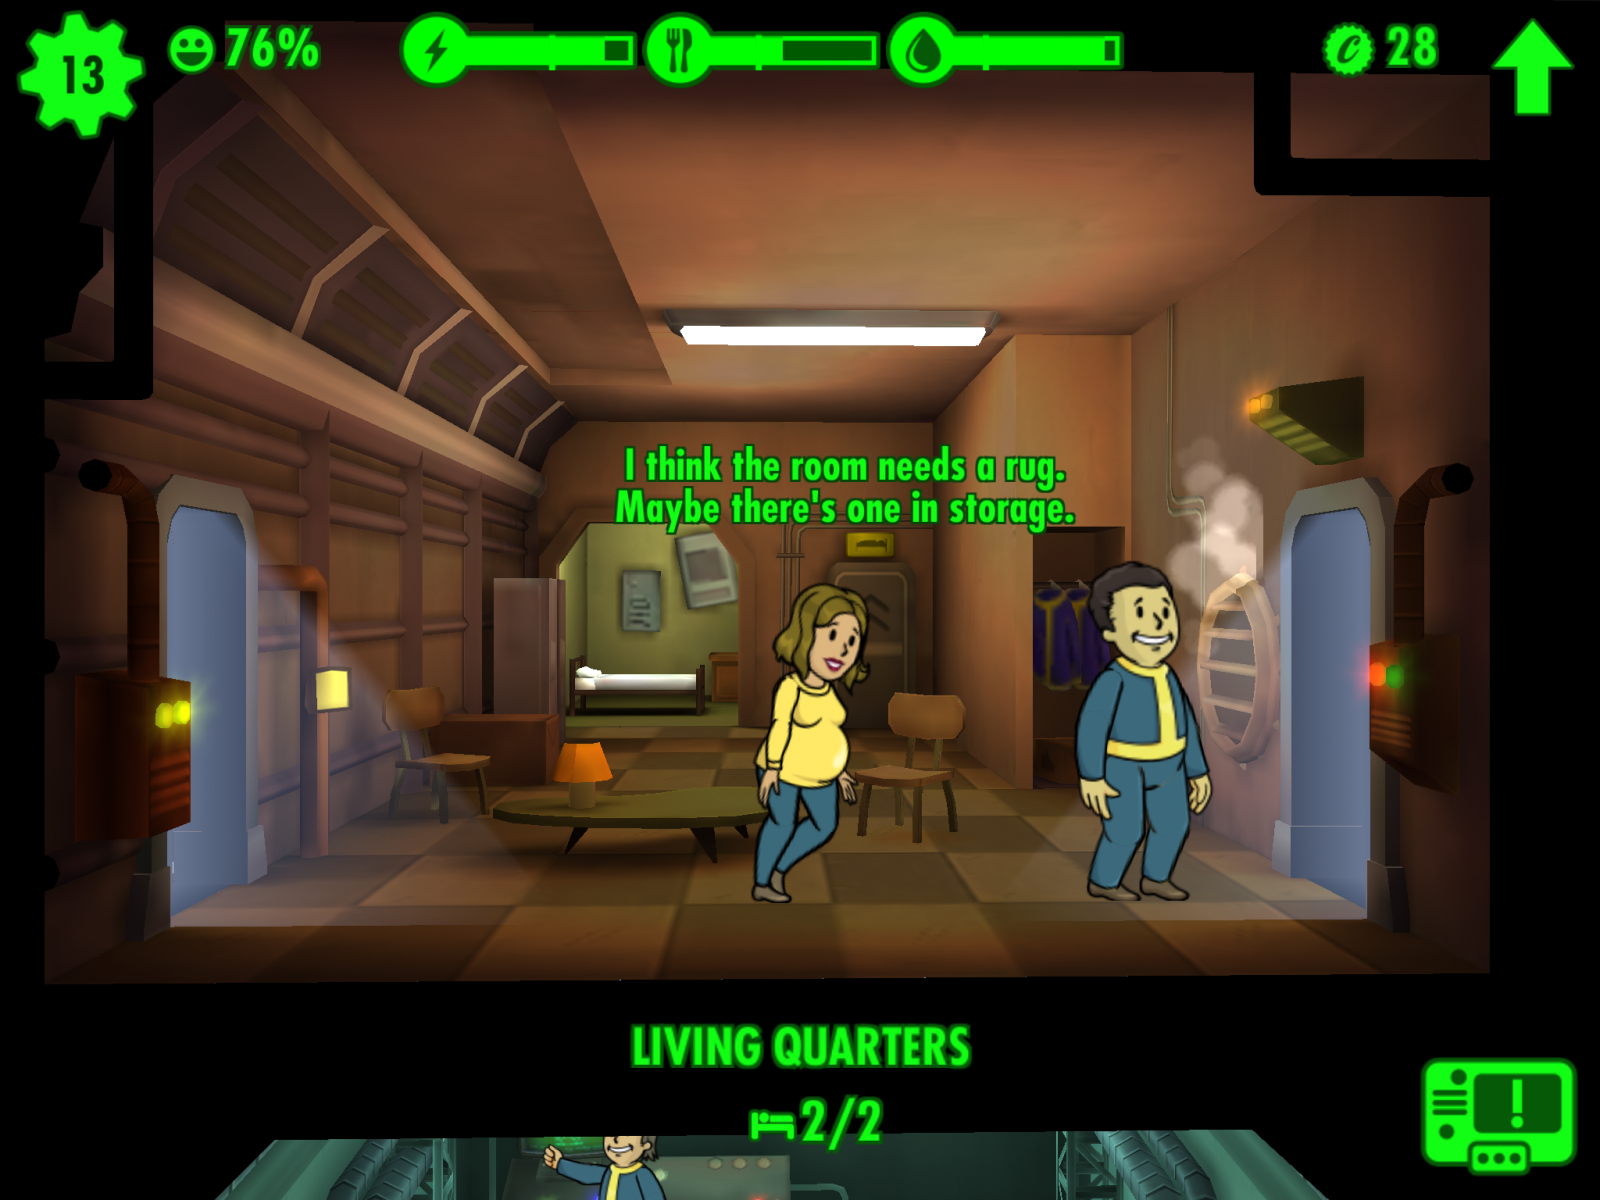 developing a mobile game like fallout shelter